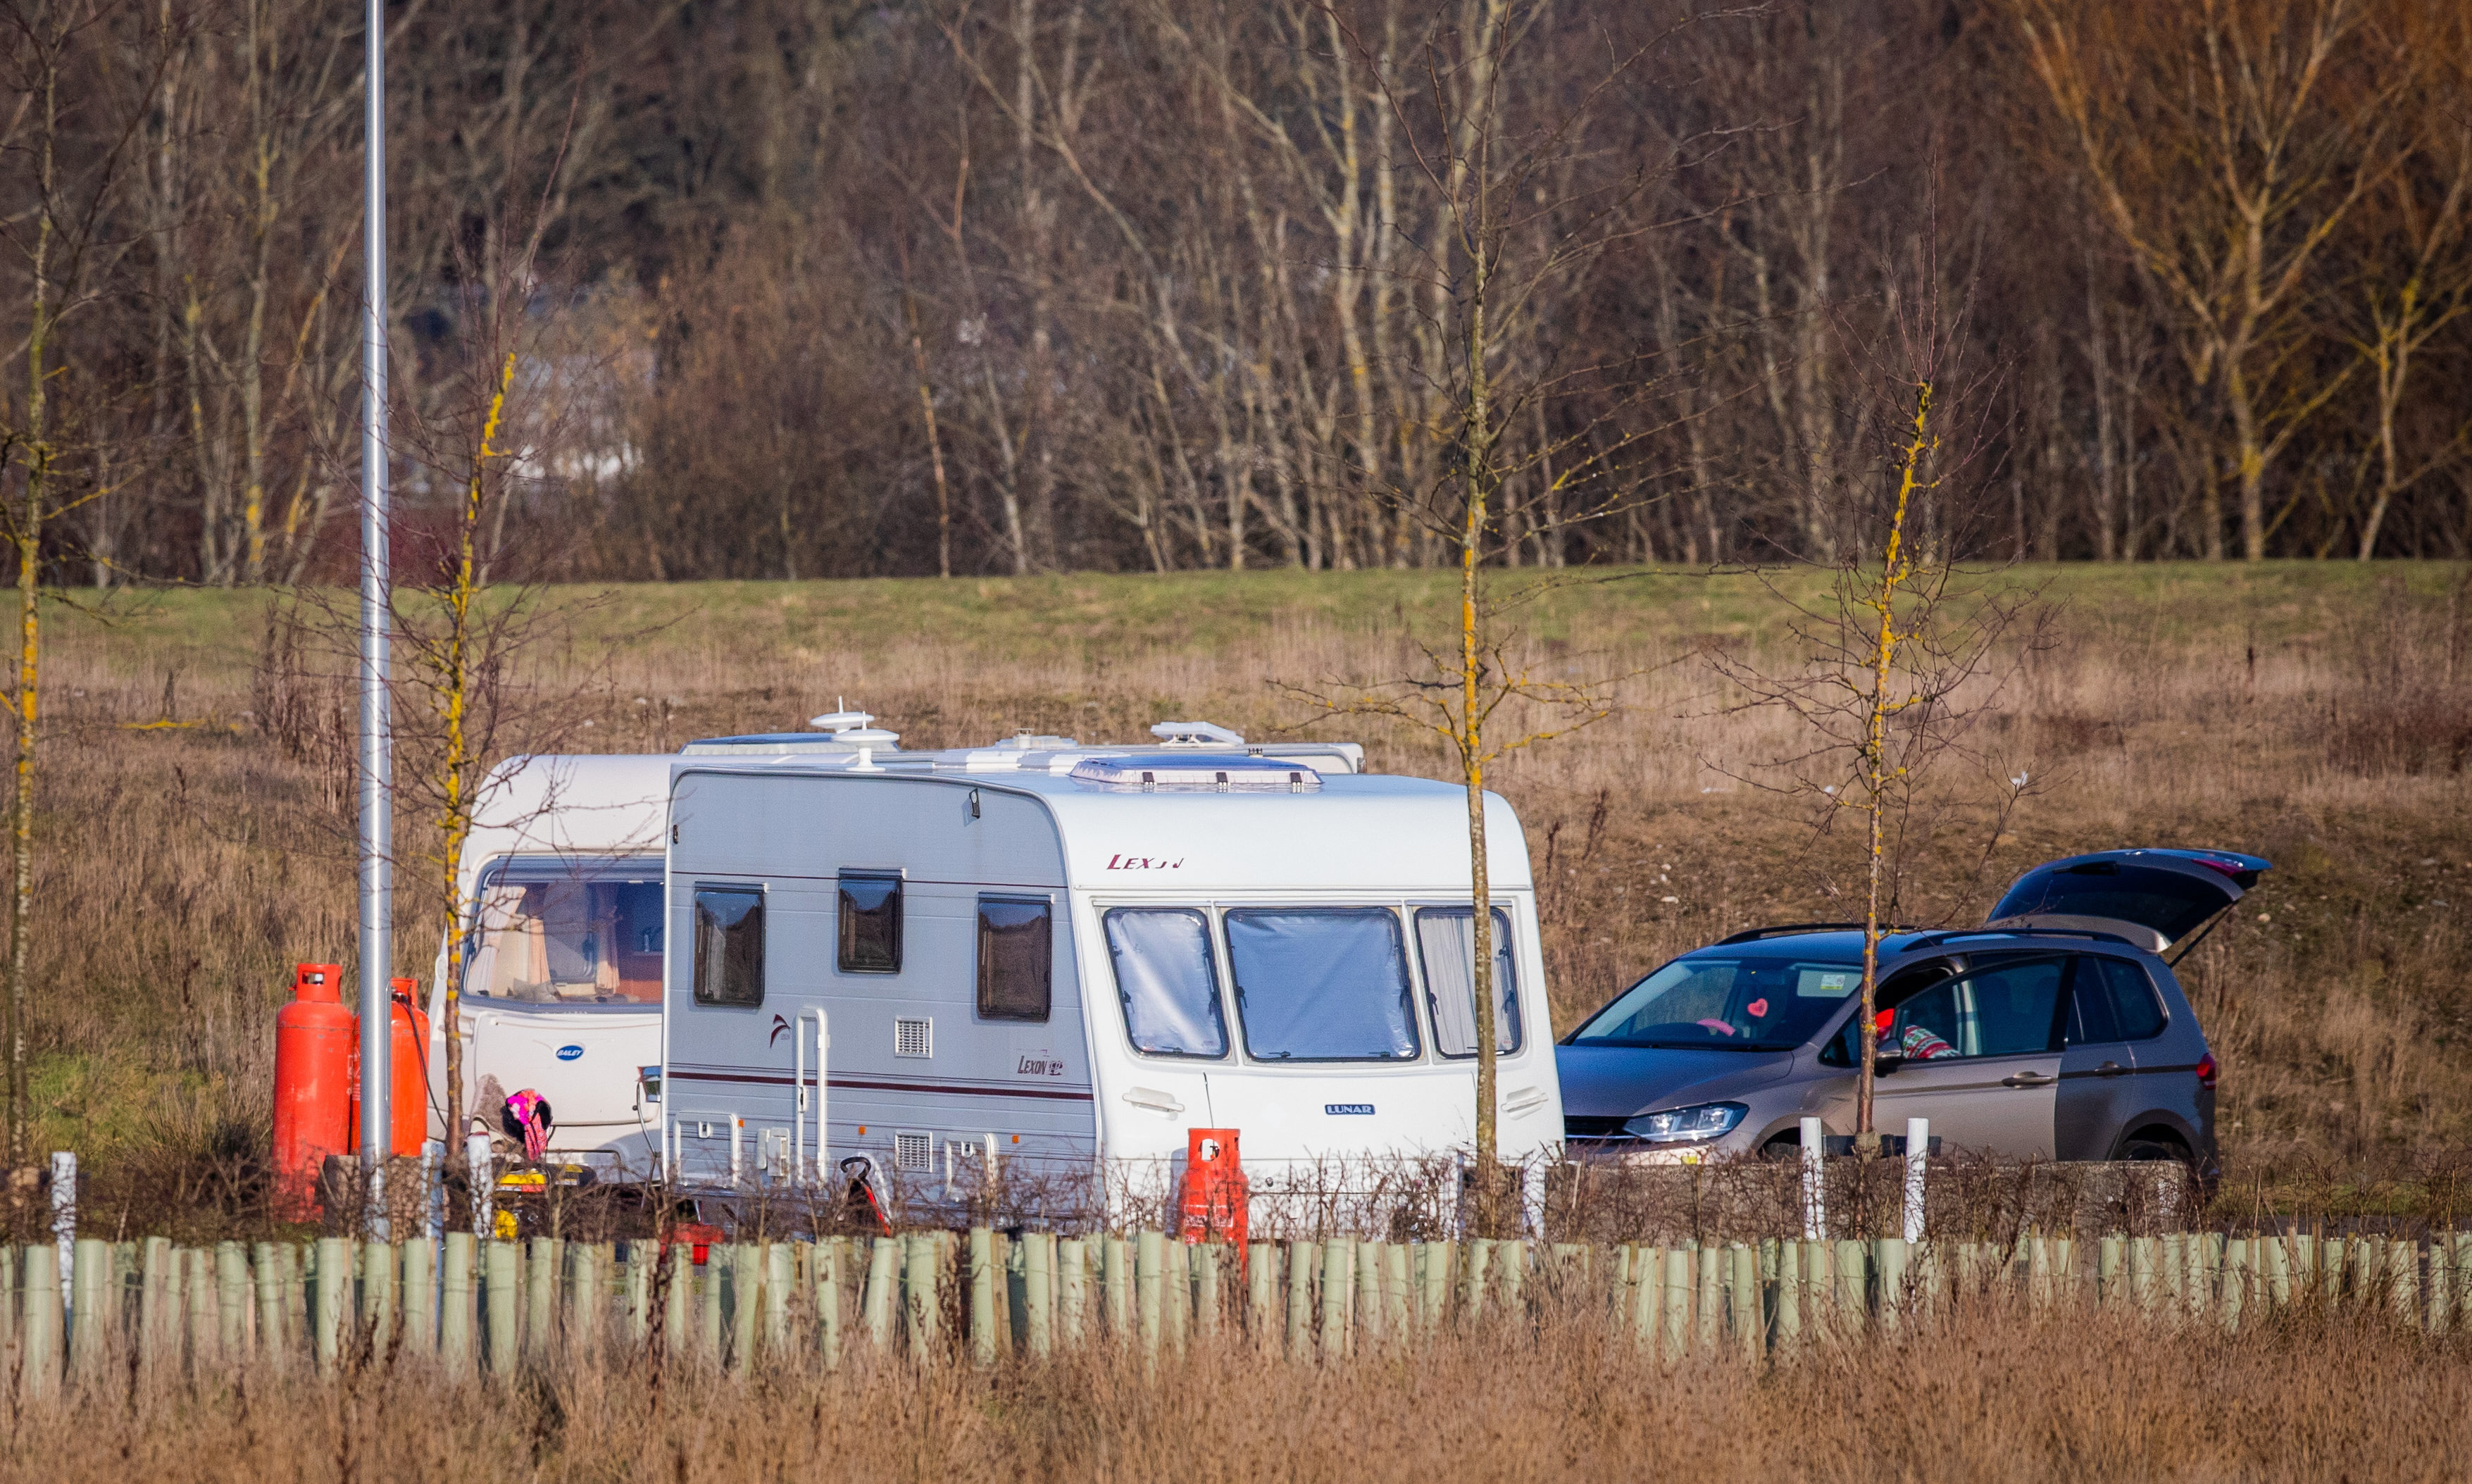 Caravans have arrived at the Food and Drink Park in Perth.